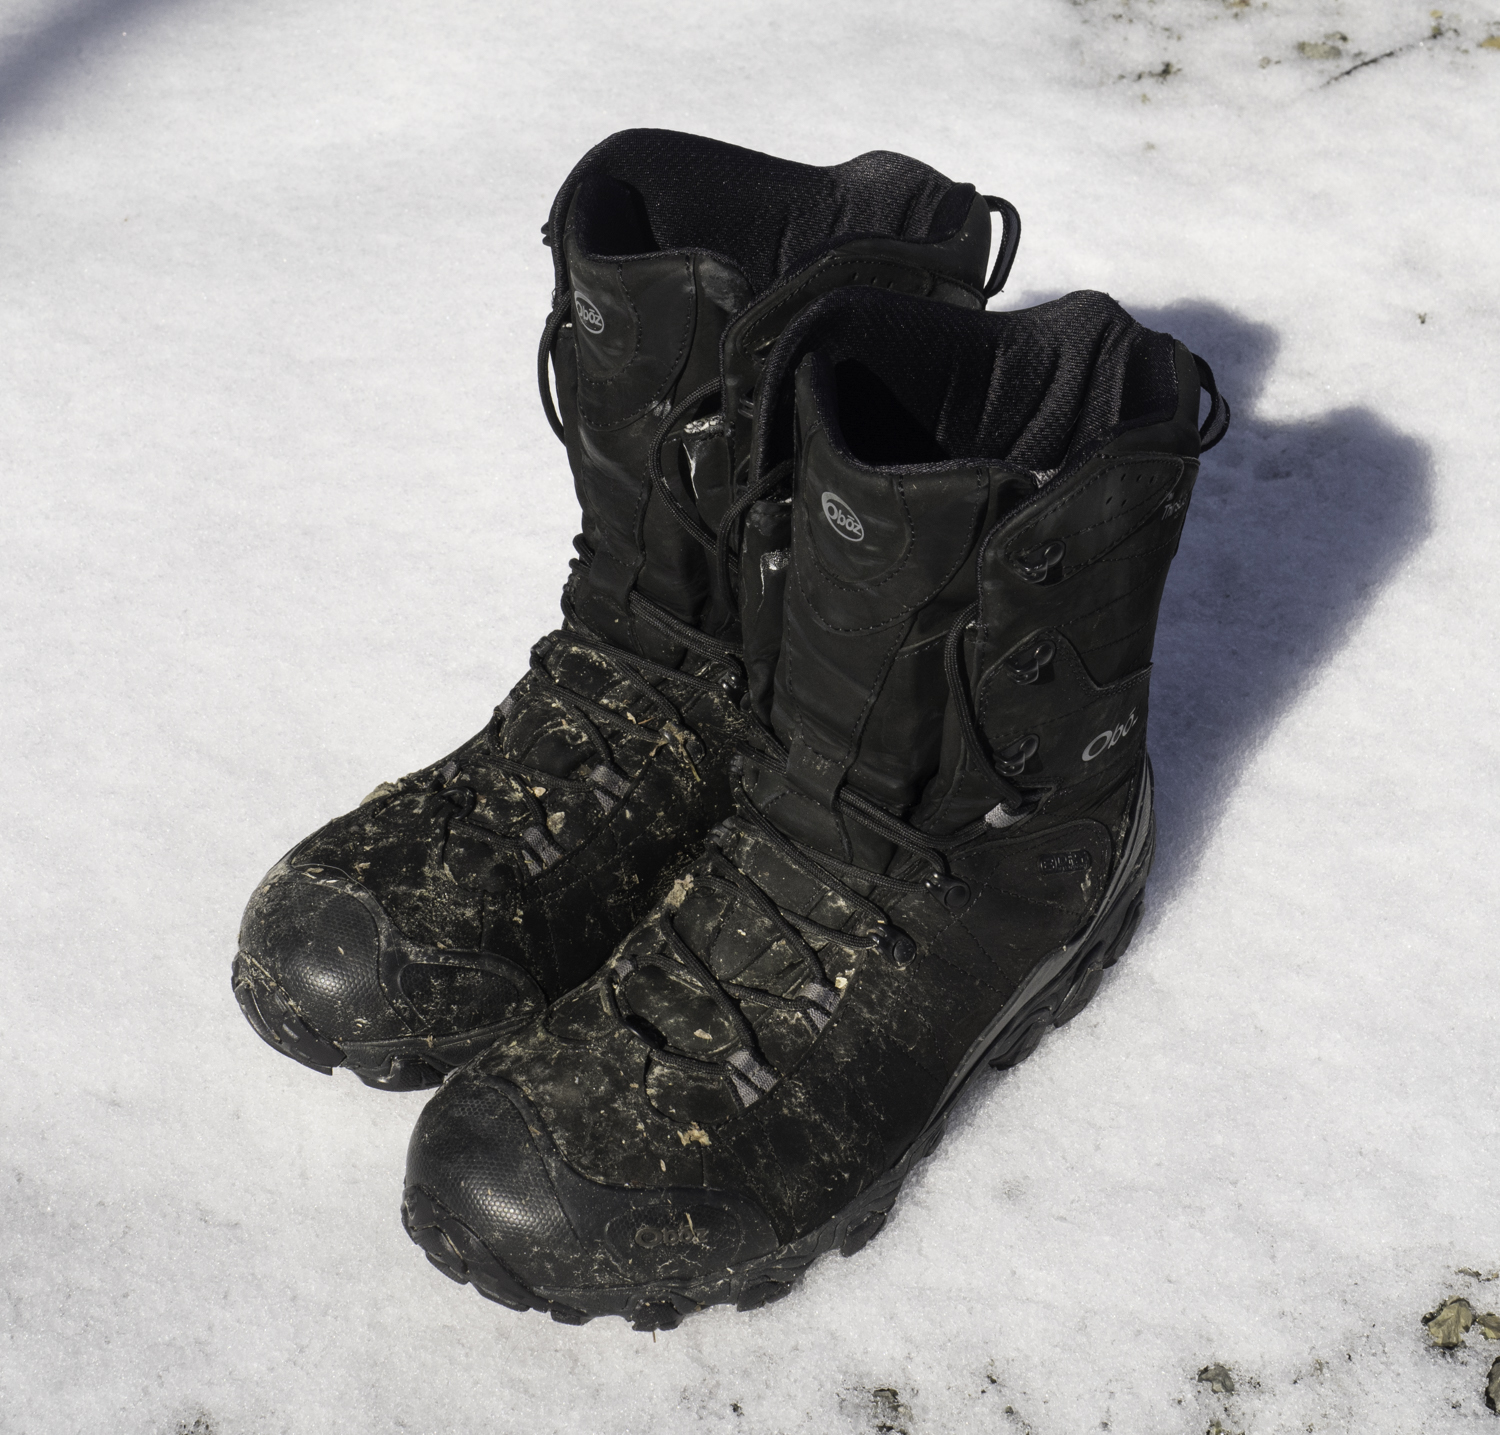 Oboz Bridger Insulated Winter Hiking Boots Review